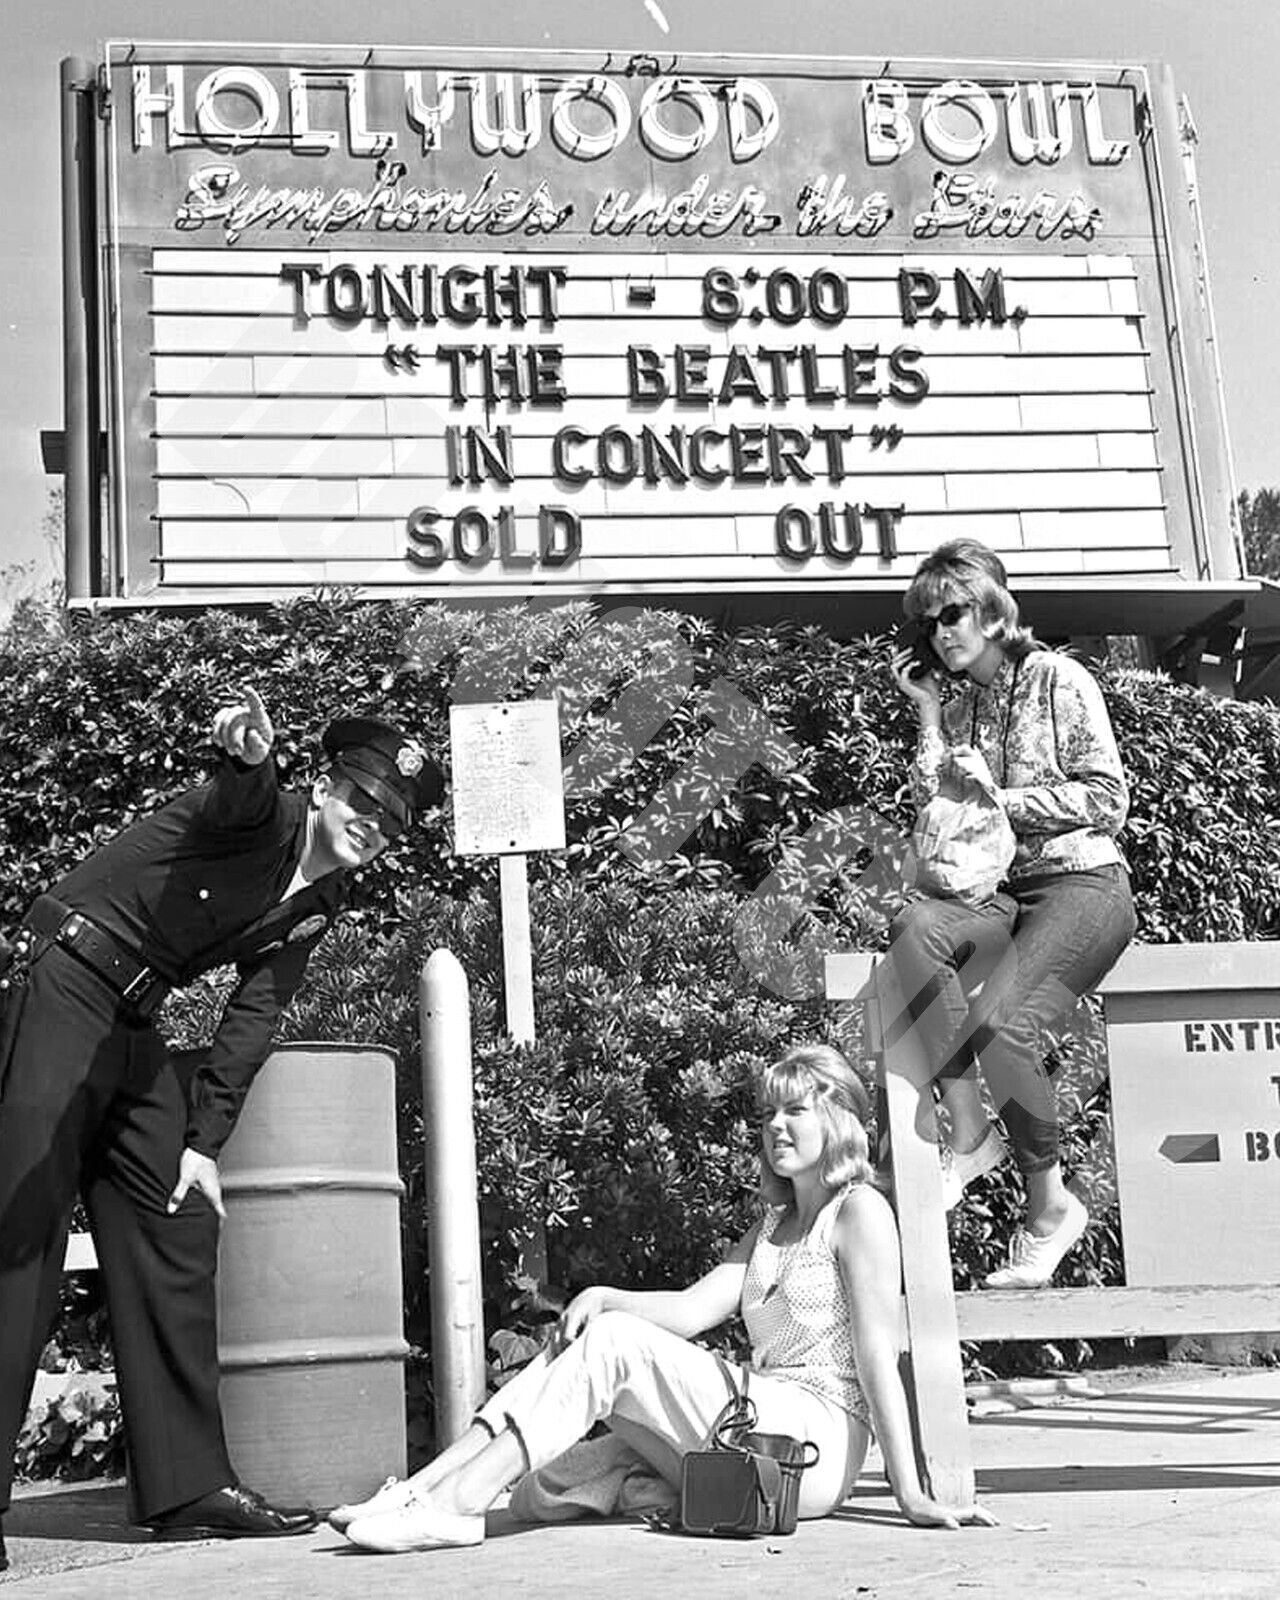 1960s THE BEATLES In Concert Hollywood Bowl Sold Out Sign 8x10 Photo